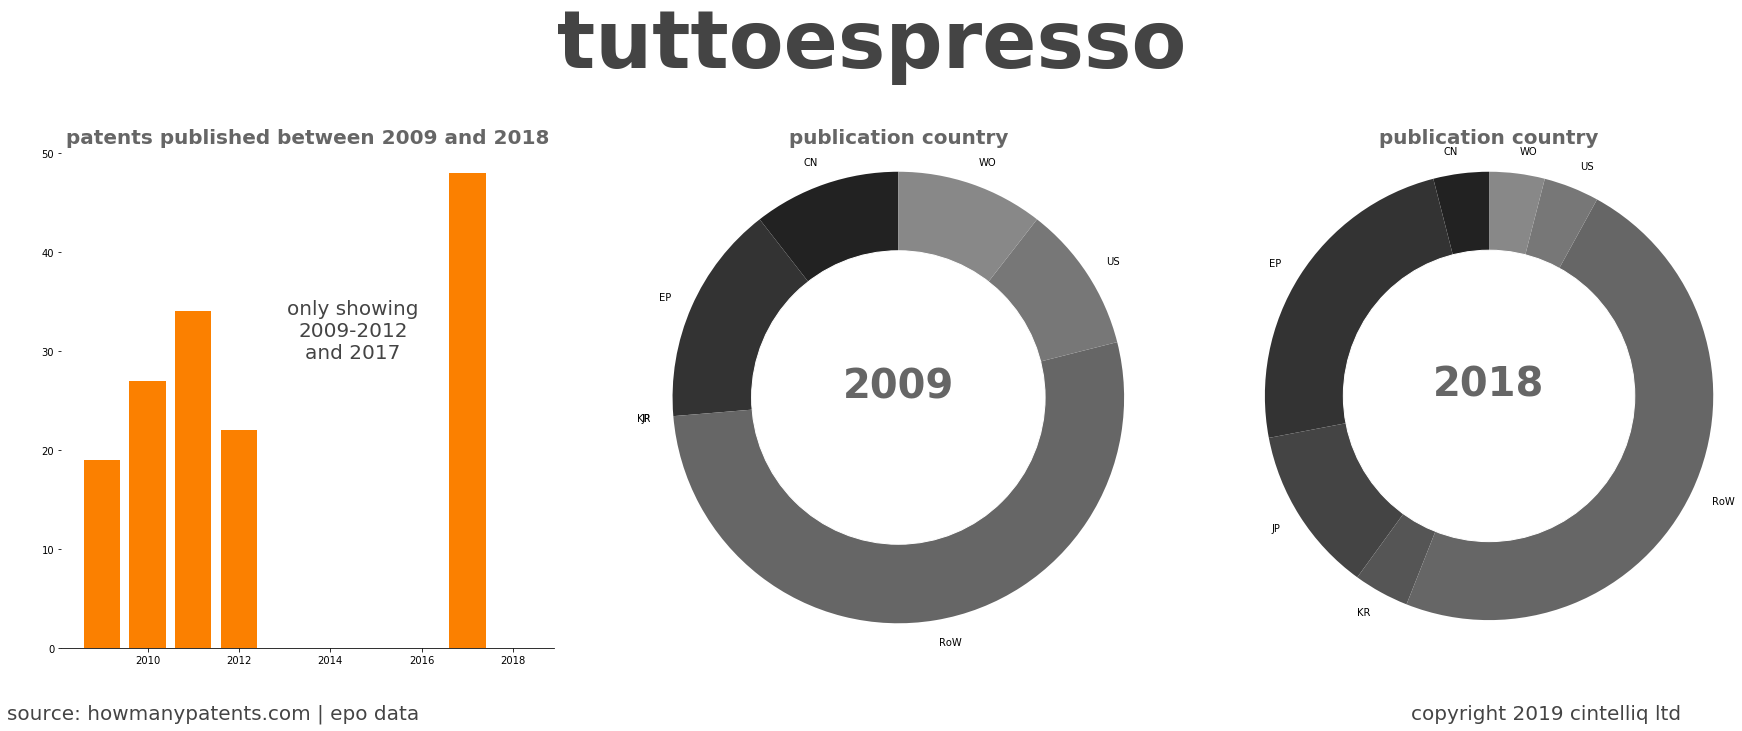 summary of patents for Tuttoespresso